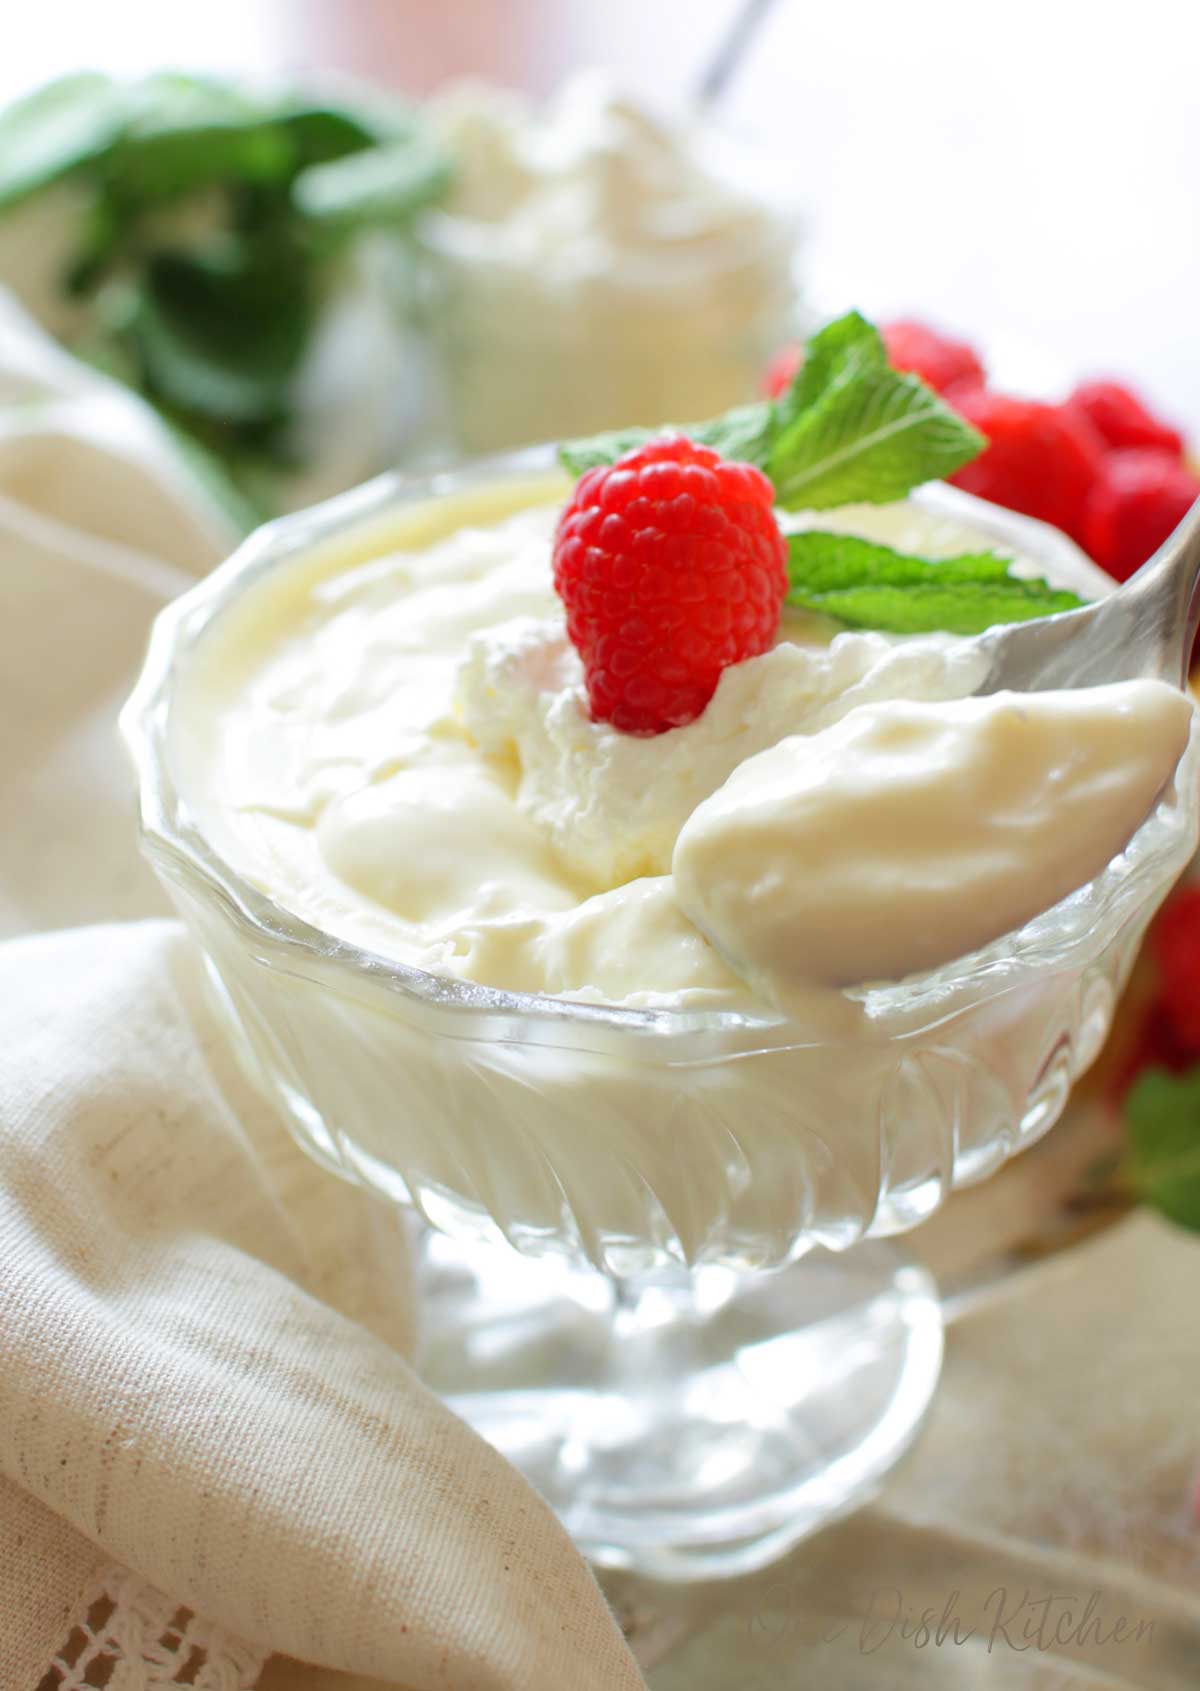 A spoonful of vanilla pudding topped with whipped cream, a raspberry, and mint leaves in a dessert glass